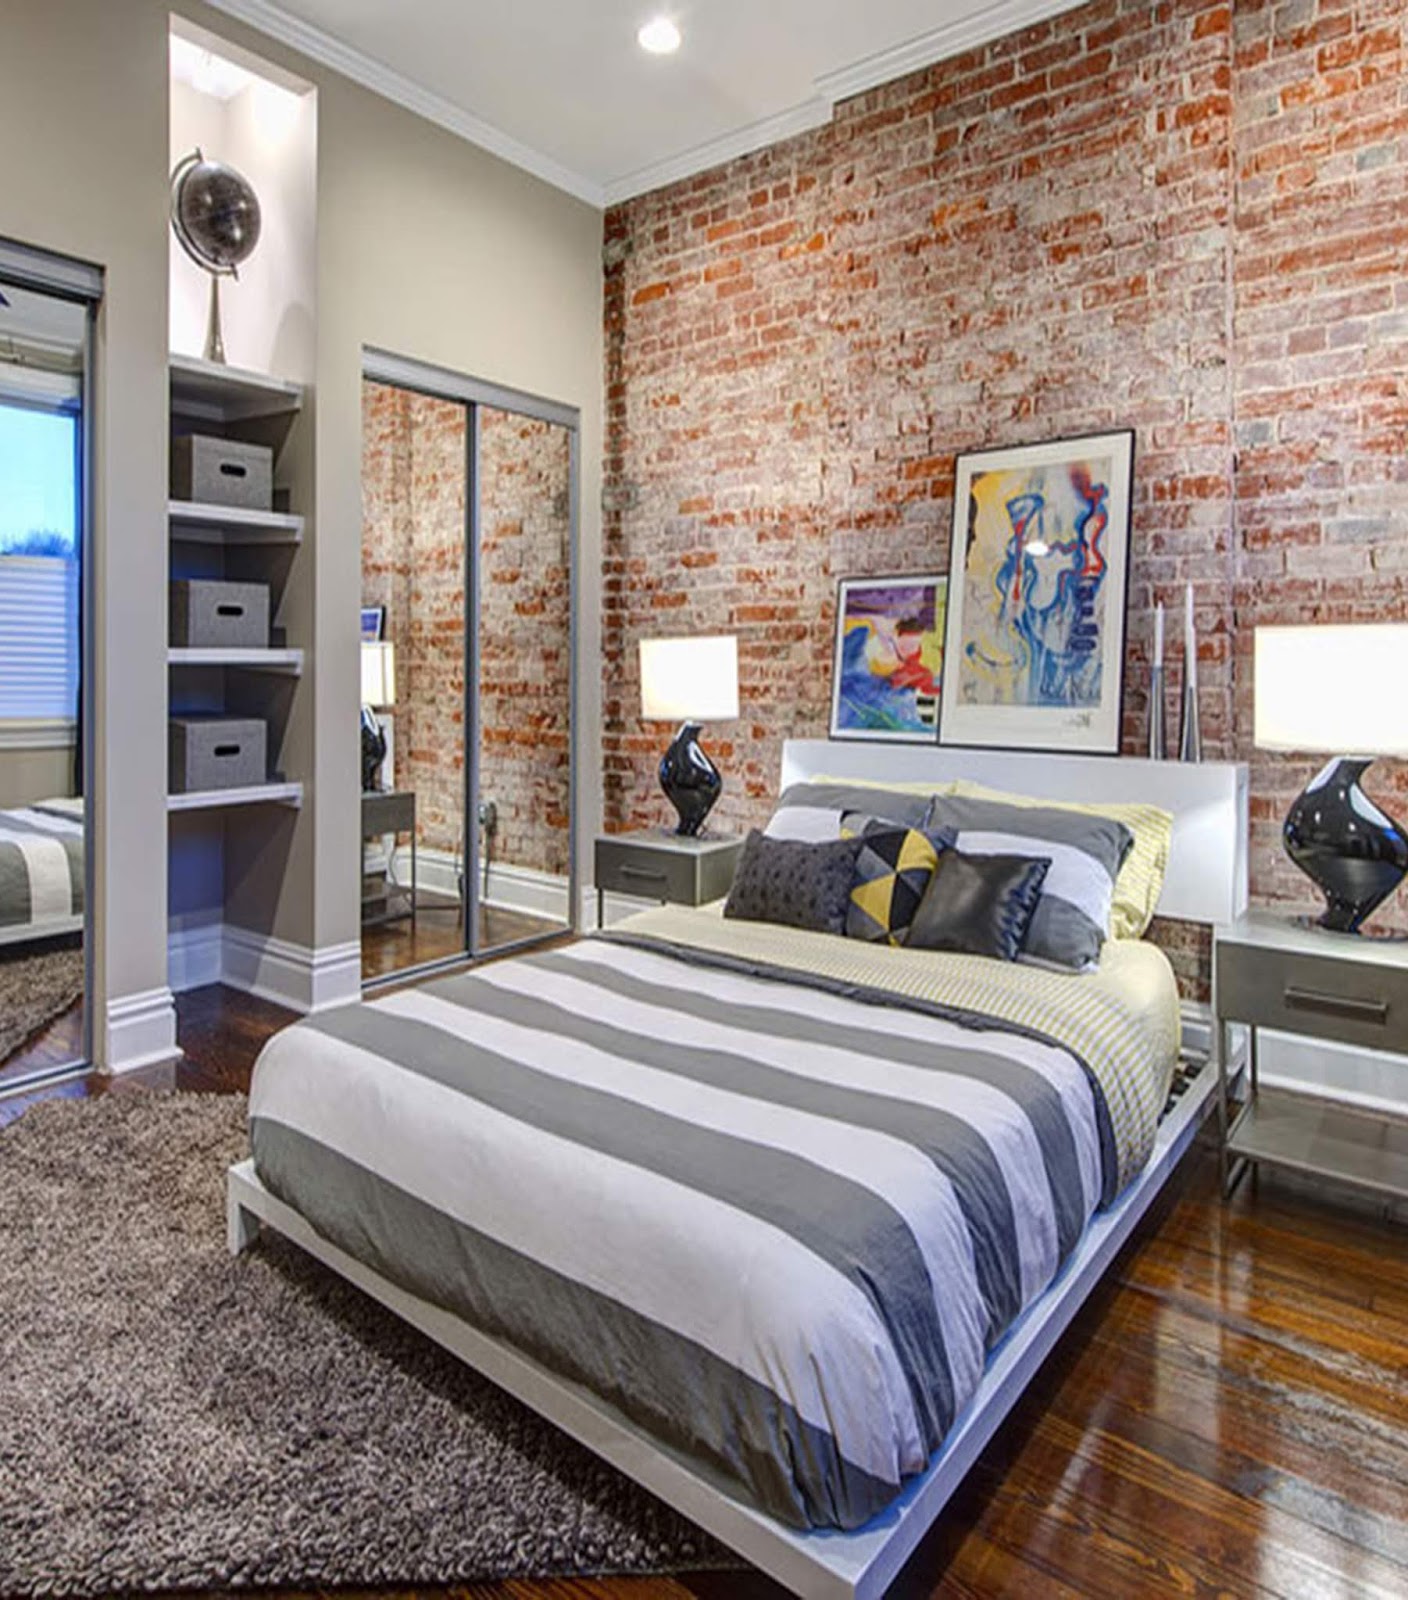 Simple Brick Wall Bedroom with Simple Decor